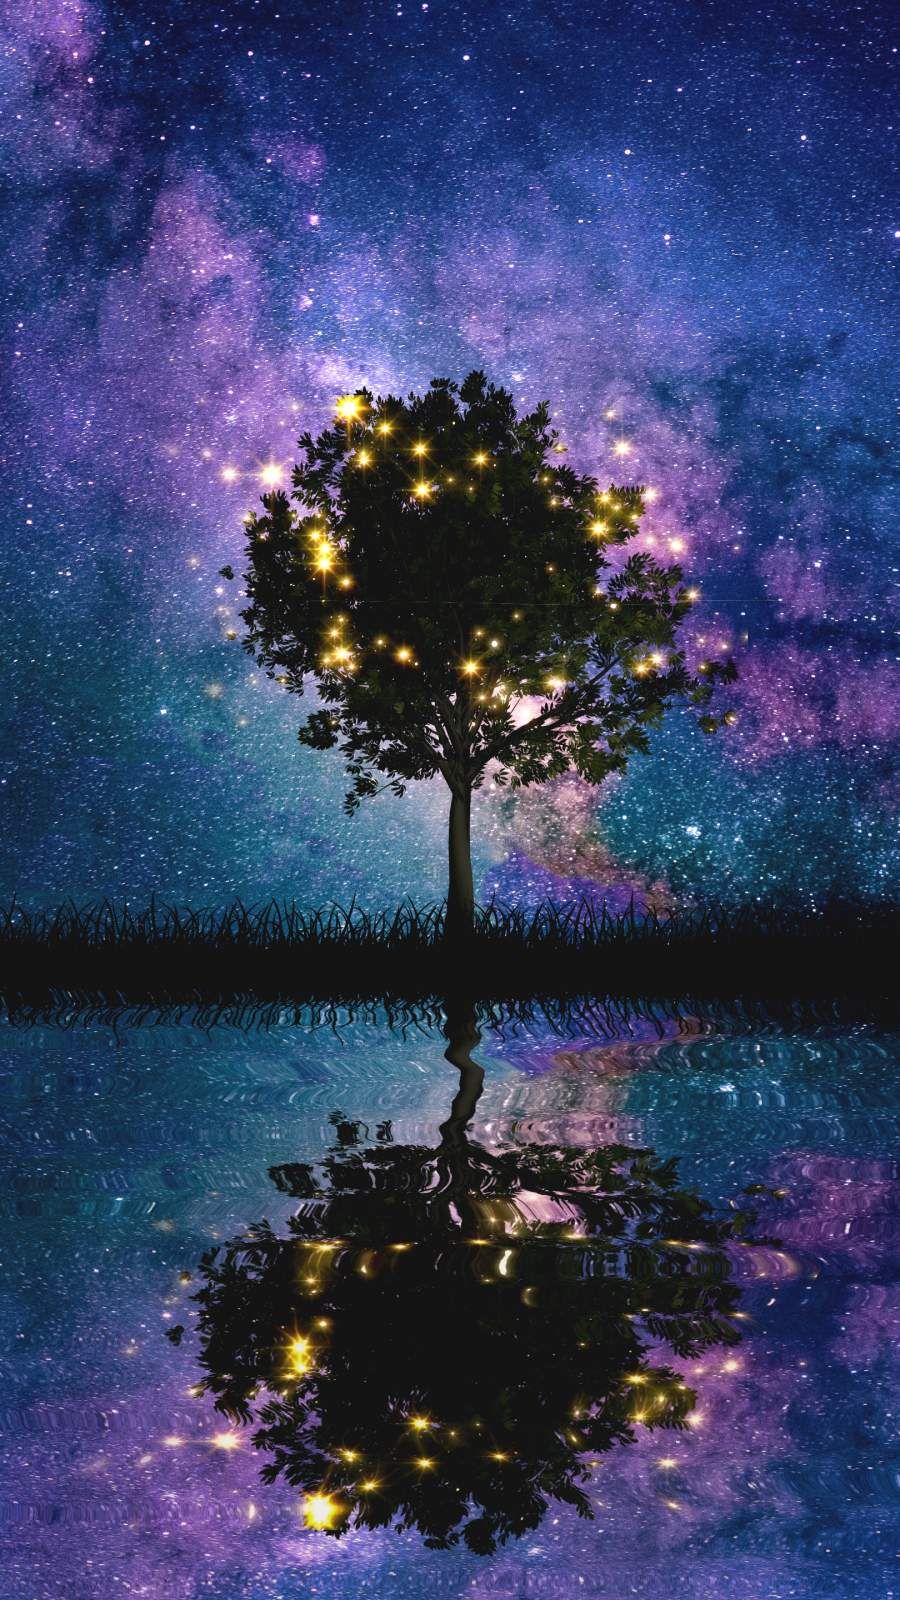 Space Tree Silhouette iPhone Wallpaper. Flower iphone wallpaper, Wallpaper space, iPhone wallpaper